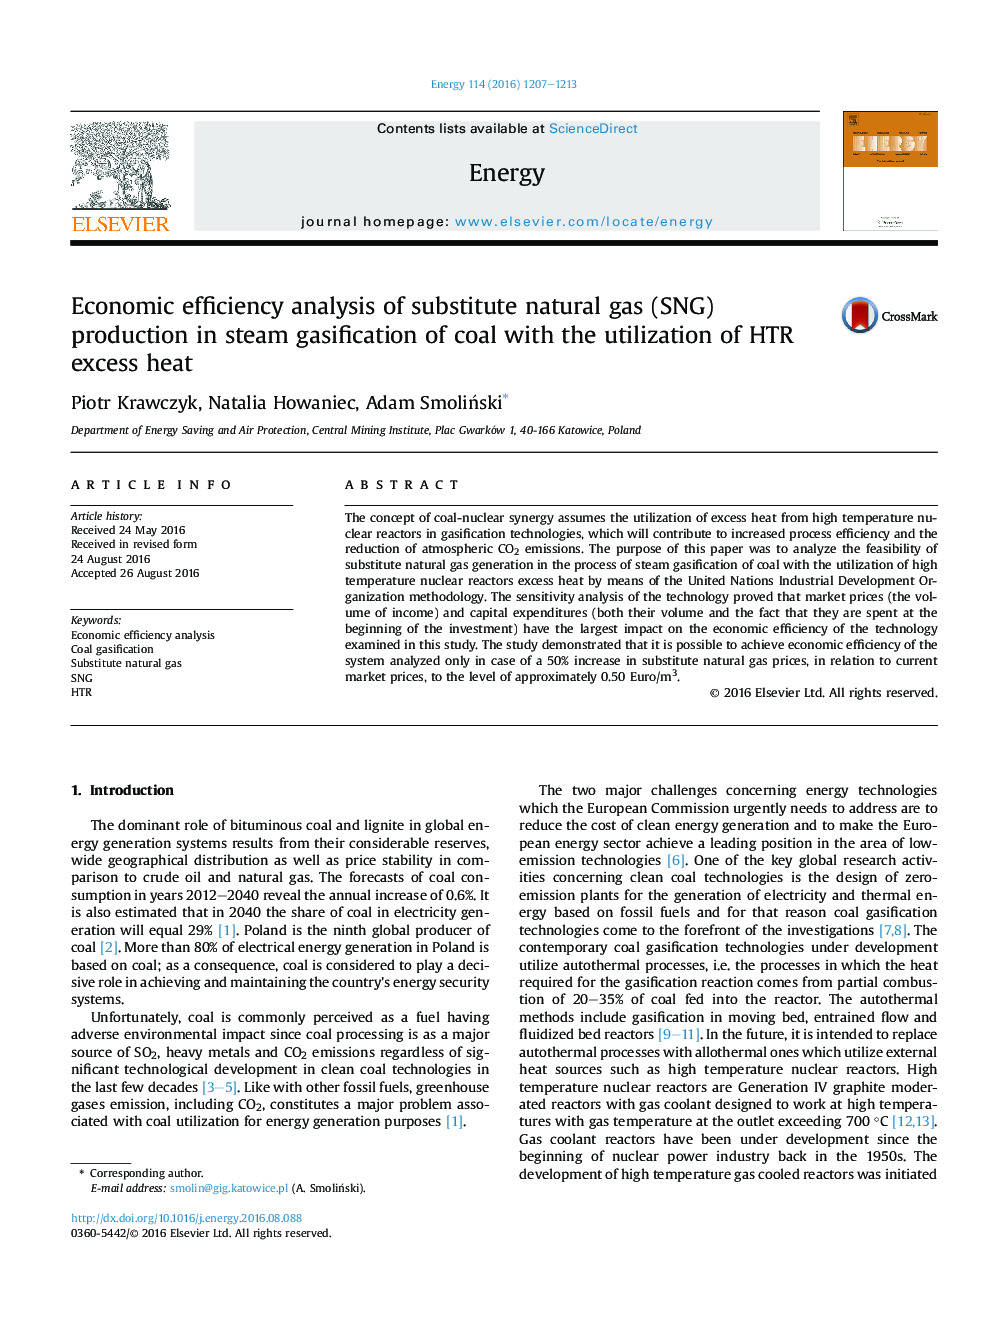 Economic efficiency analysis of substitute natural gas (SNG) production in steam gasification of coal with the utilization of HTR excess heat